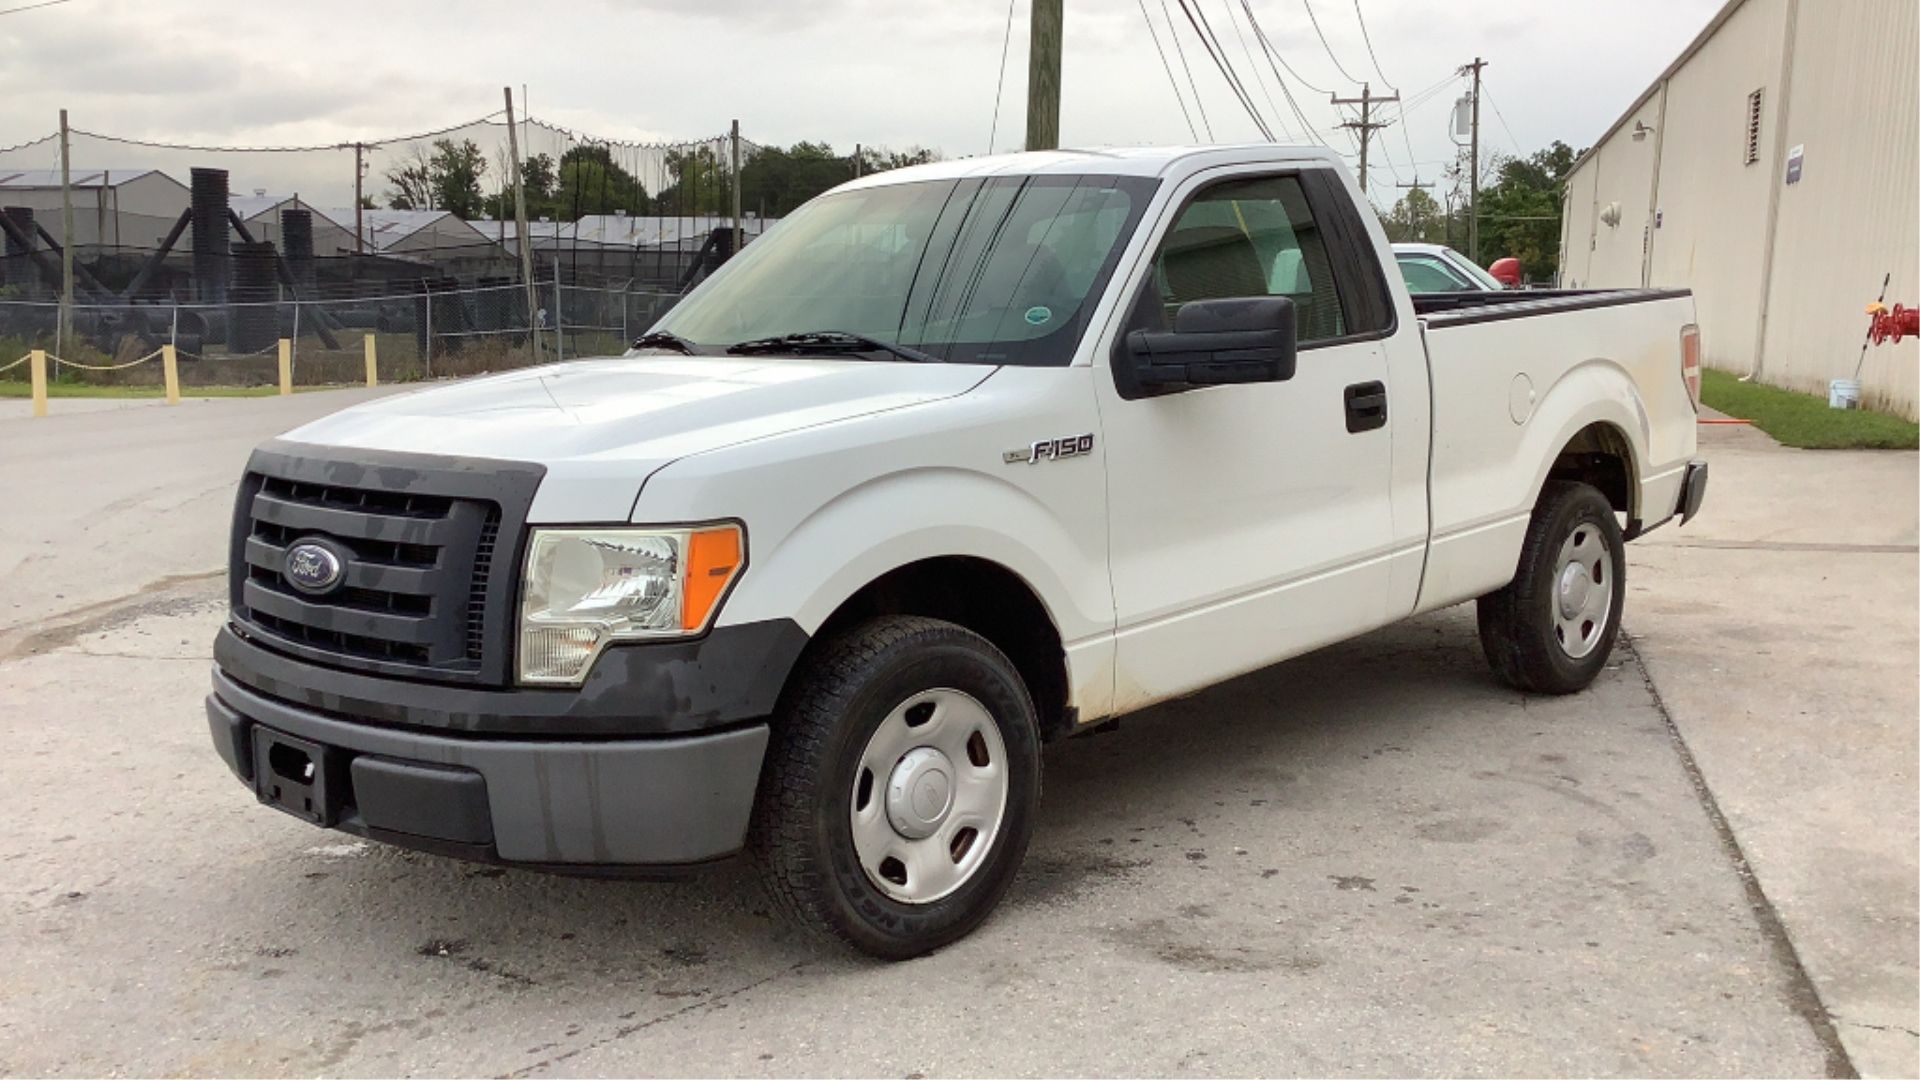 2009 Ford F-150 Regular Cab XL 2WD - Image 10 of 71